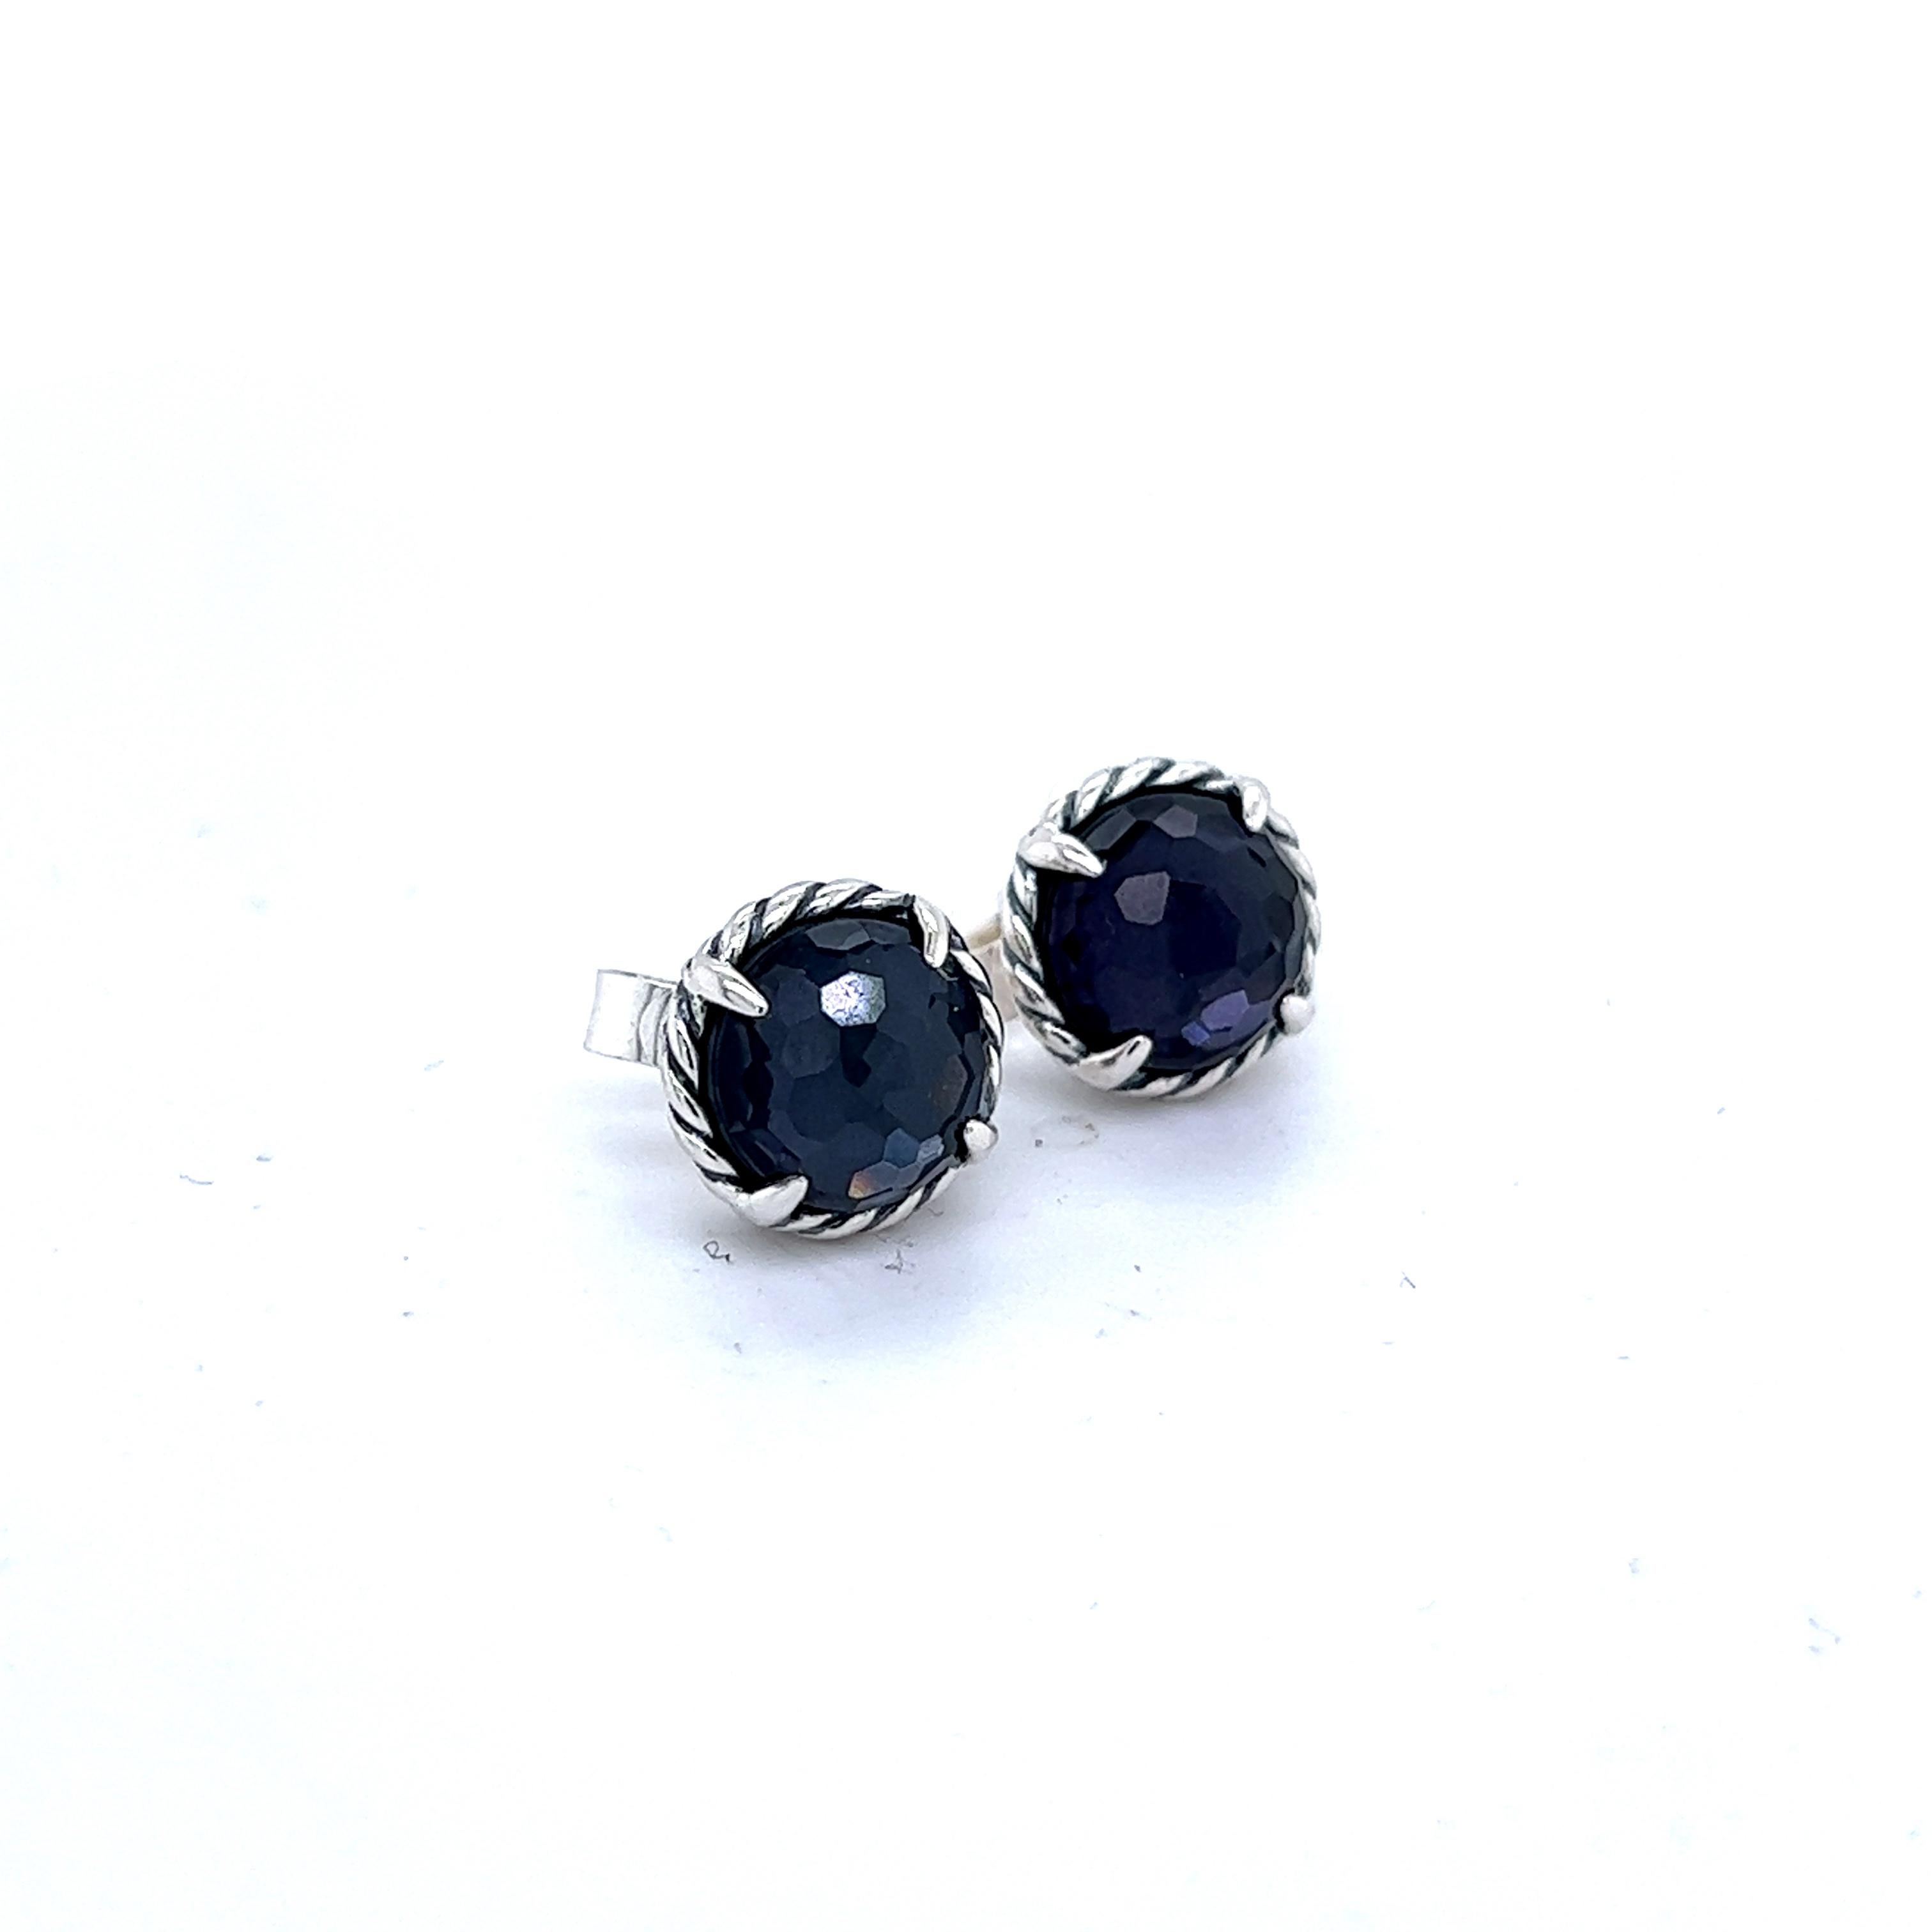 David Yurman Estate Black Orchid Petite Chantelaine Stud Earrings Silver DY160

Retail: $475.00

TRUSTED SELLER SINCE 2002

PLEASE SEE OUR HUNDREDS OF POSITIVE FEEDBACKS FROM OUR CLIENTS!!

FREE SHIPPING

This elegant Authentic David Yurman Men's